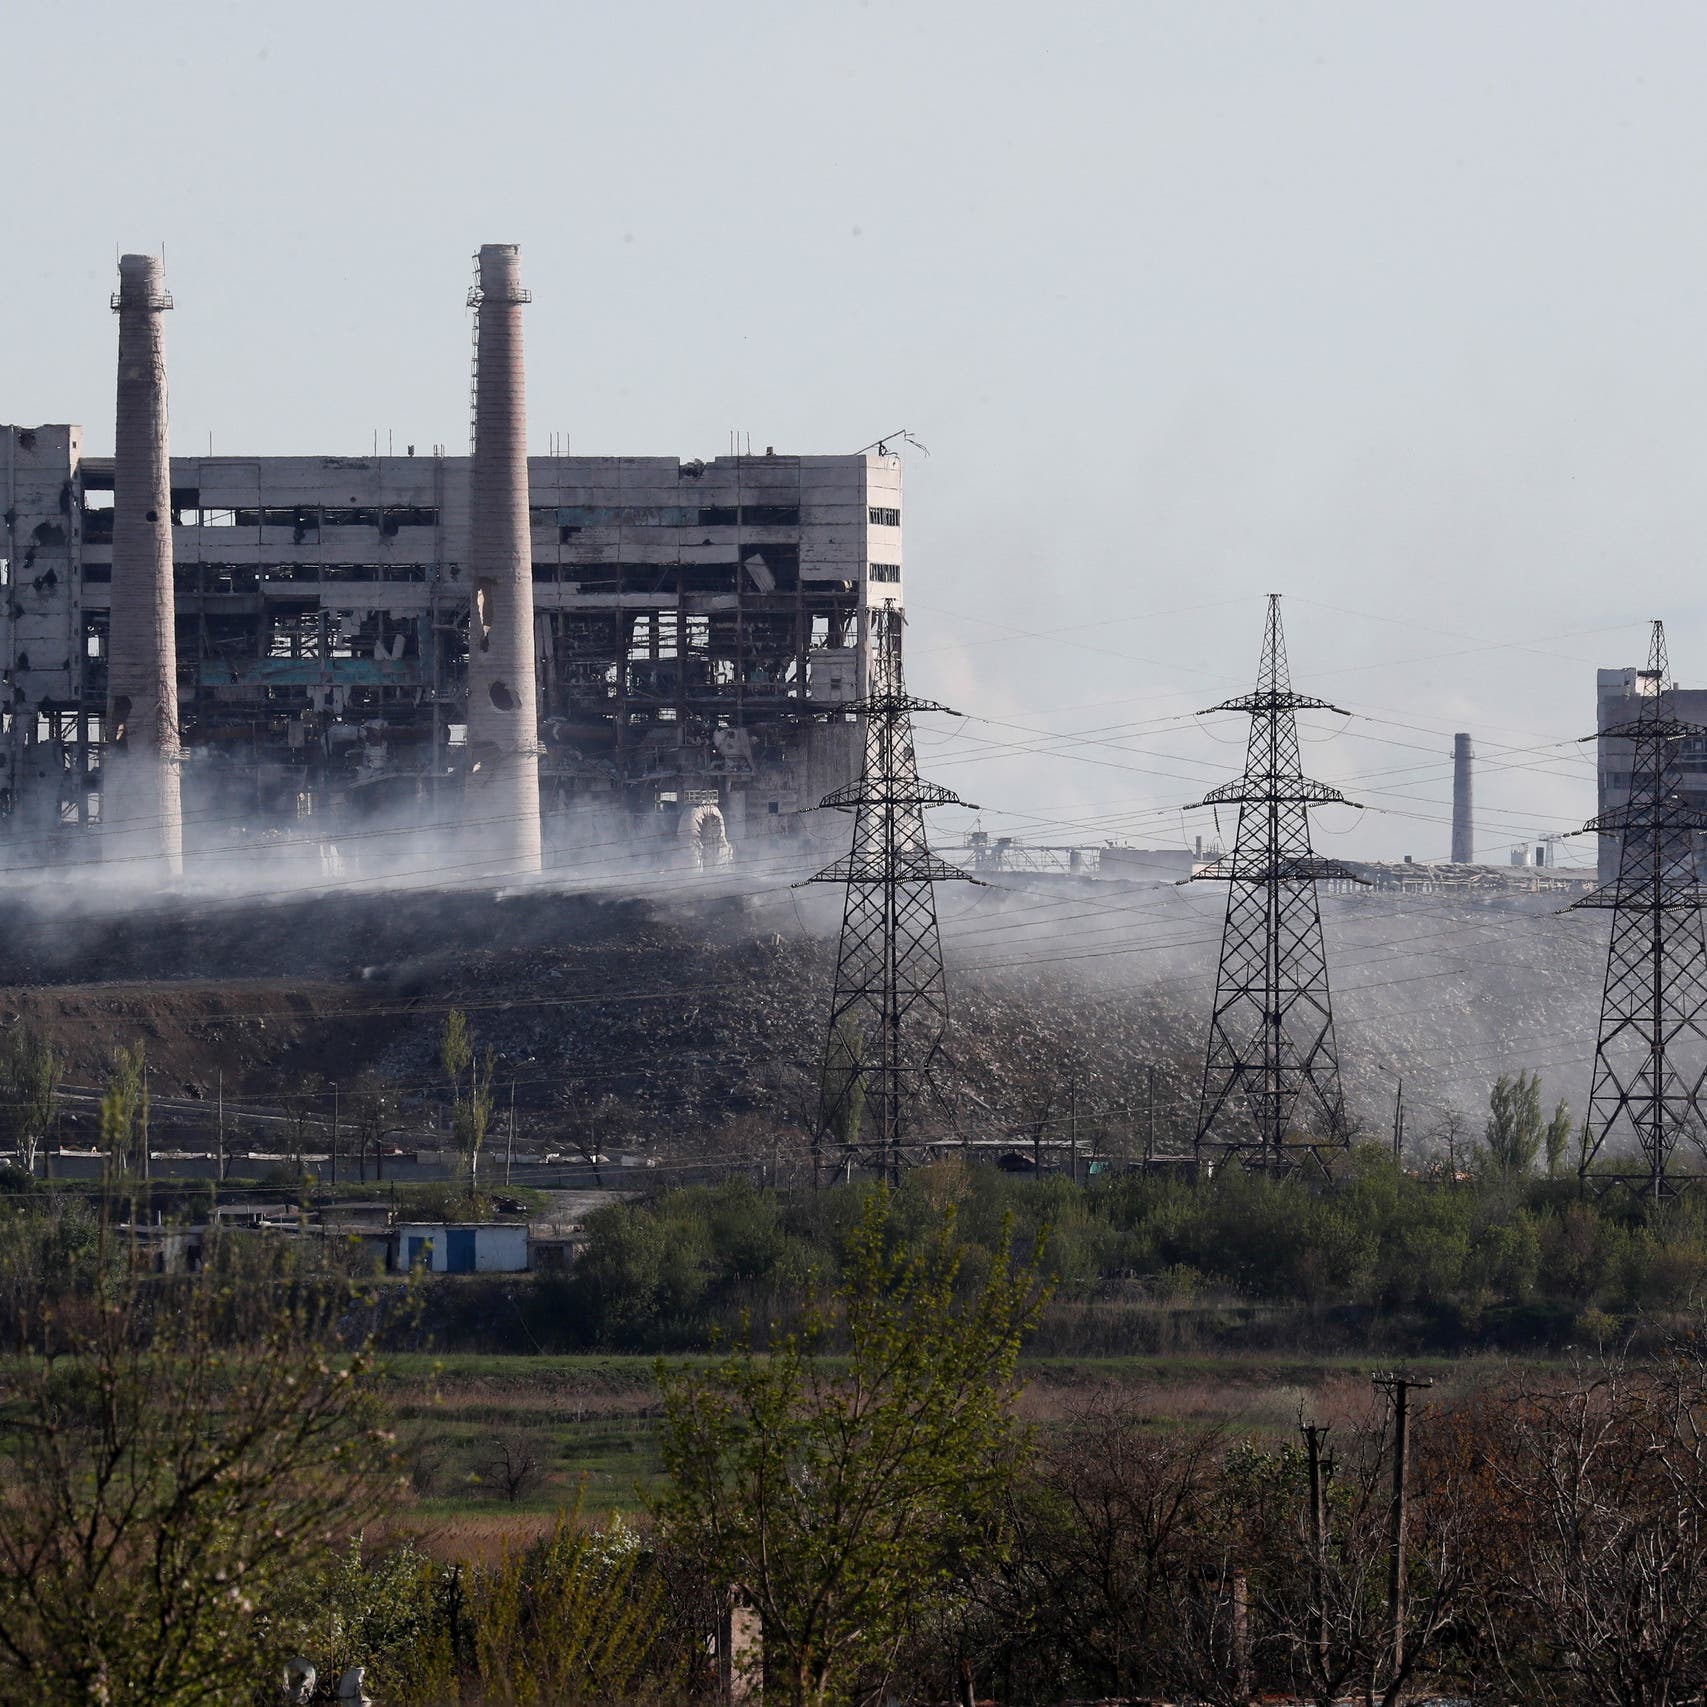 Ukraine: Resistance in Azovstal plant holds, Mariupol not under full Russian control